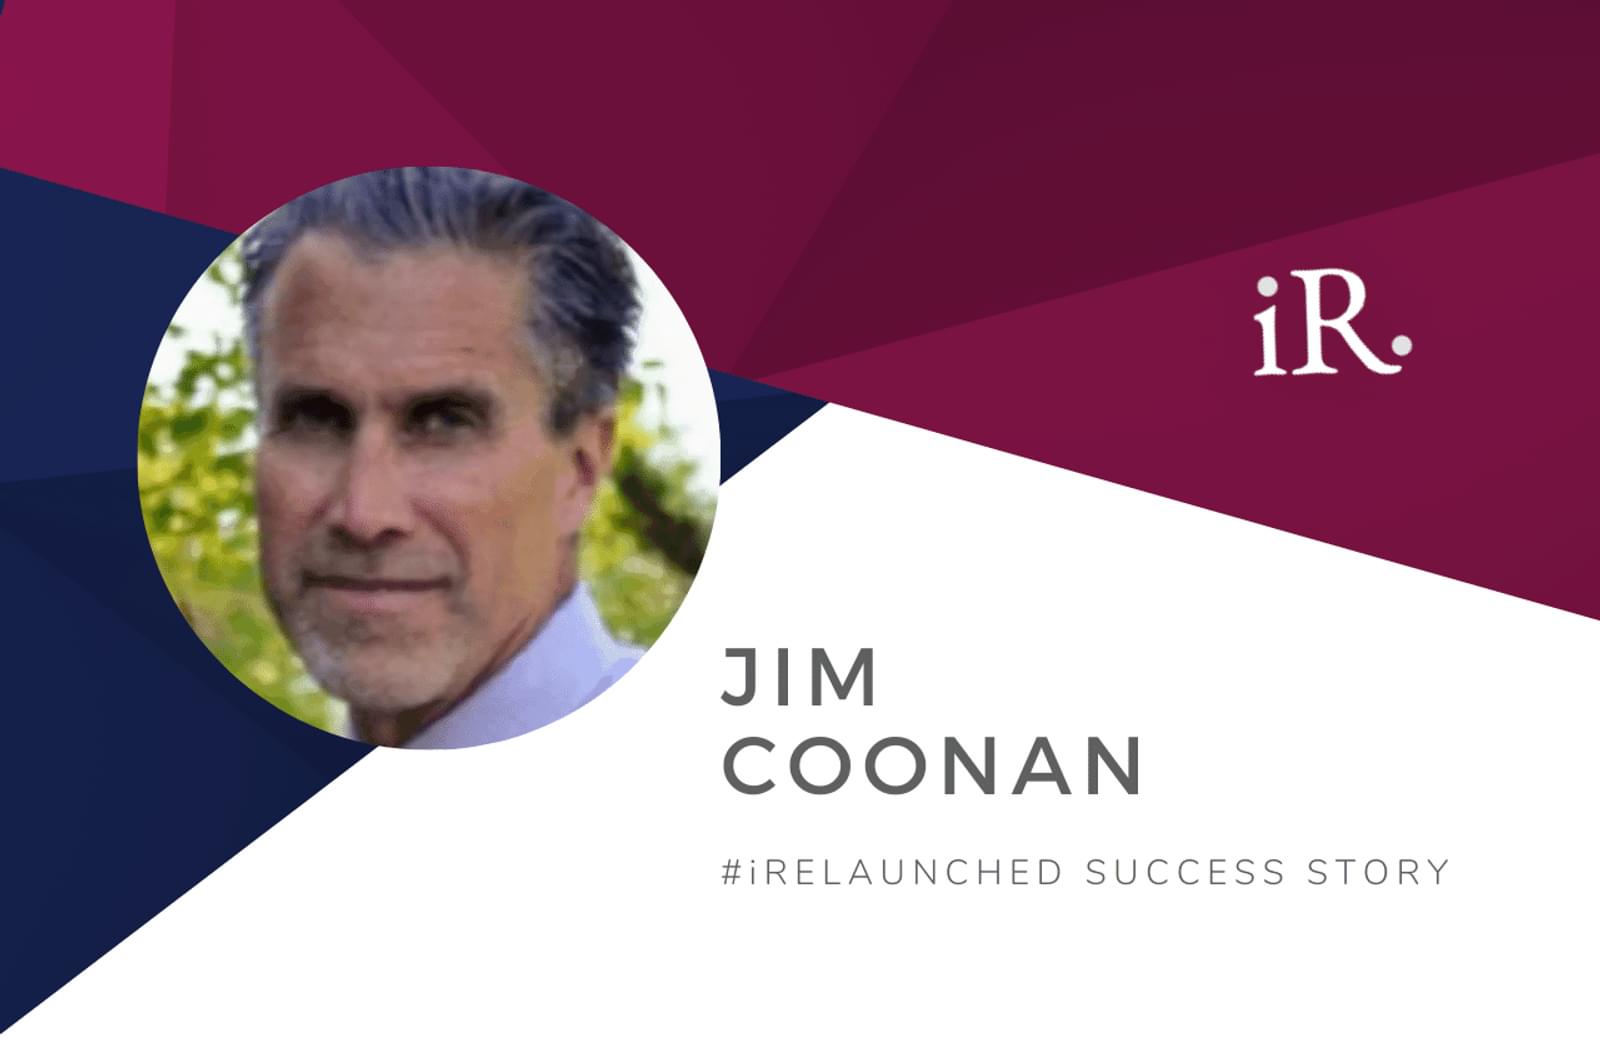 Jim Coonan's headshot and the text #iRelaunched Success Story along with the iRelaunch logo.  A navy and maroon geometric textured background intersect behind Jim's headshot.